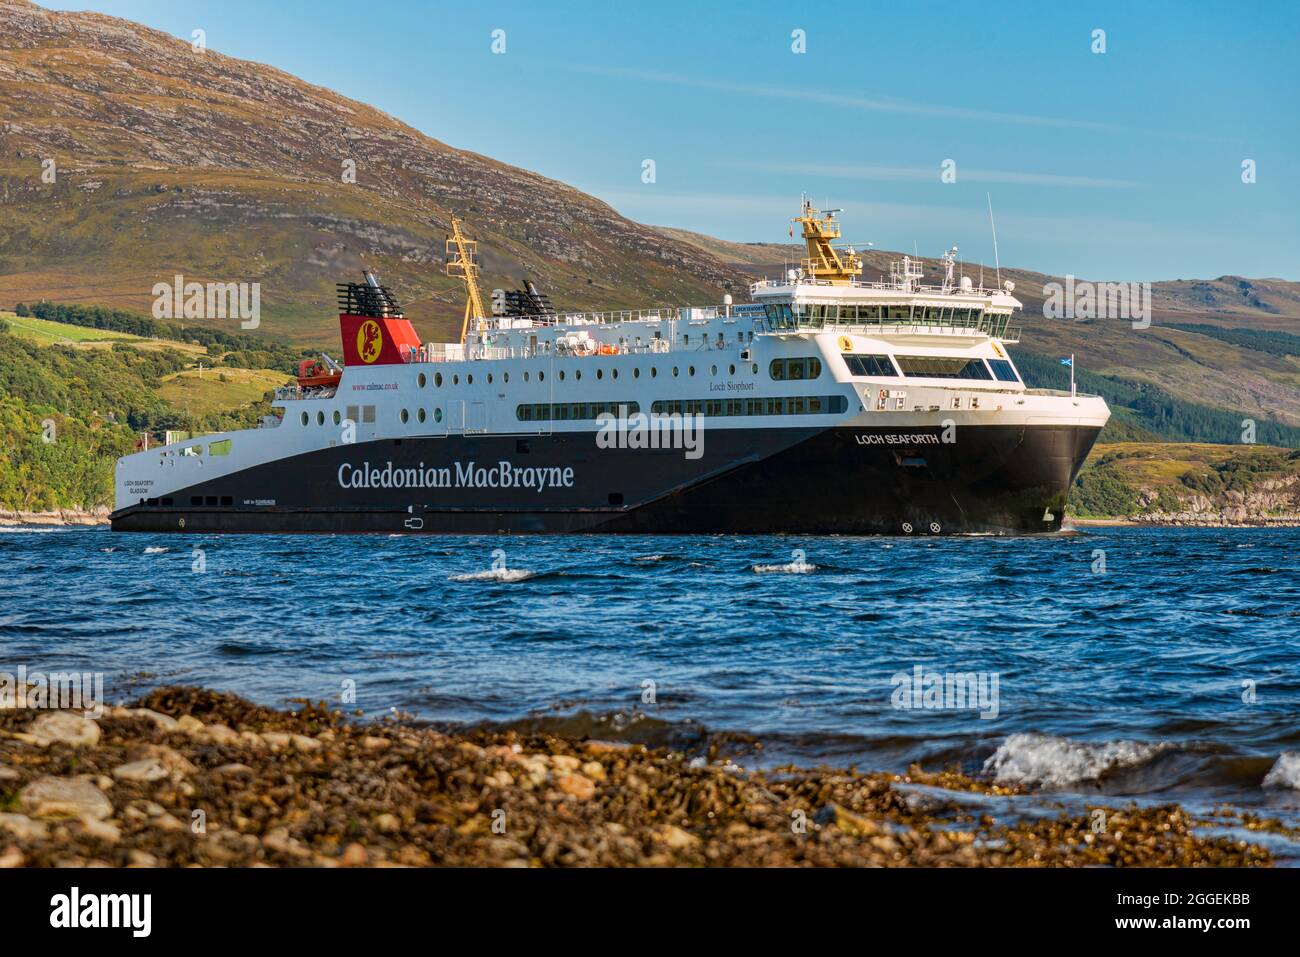 The Scottish ferry Loch Seaforth is operated by Caledonian MacBrayne (CalMac) on the crossing between Ullapool and Stornoway on the Isle of Lewis. Stock Photo